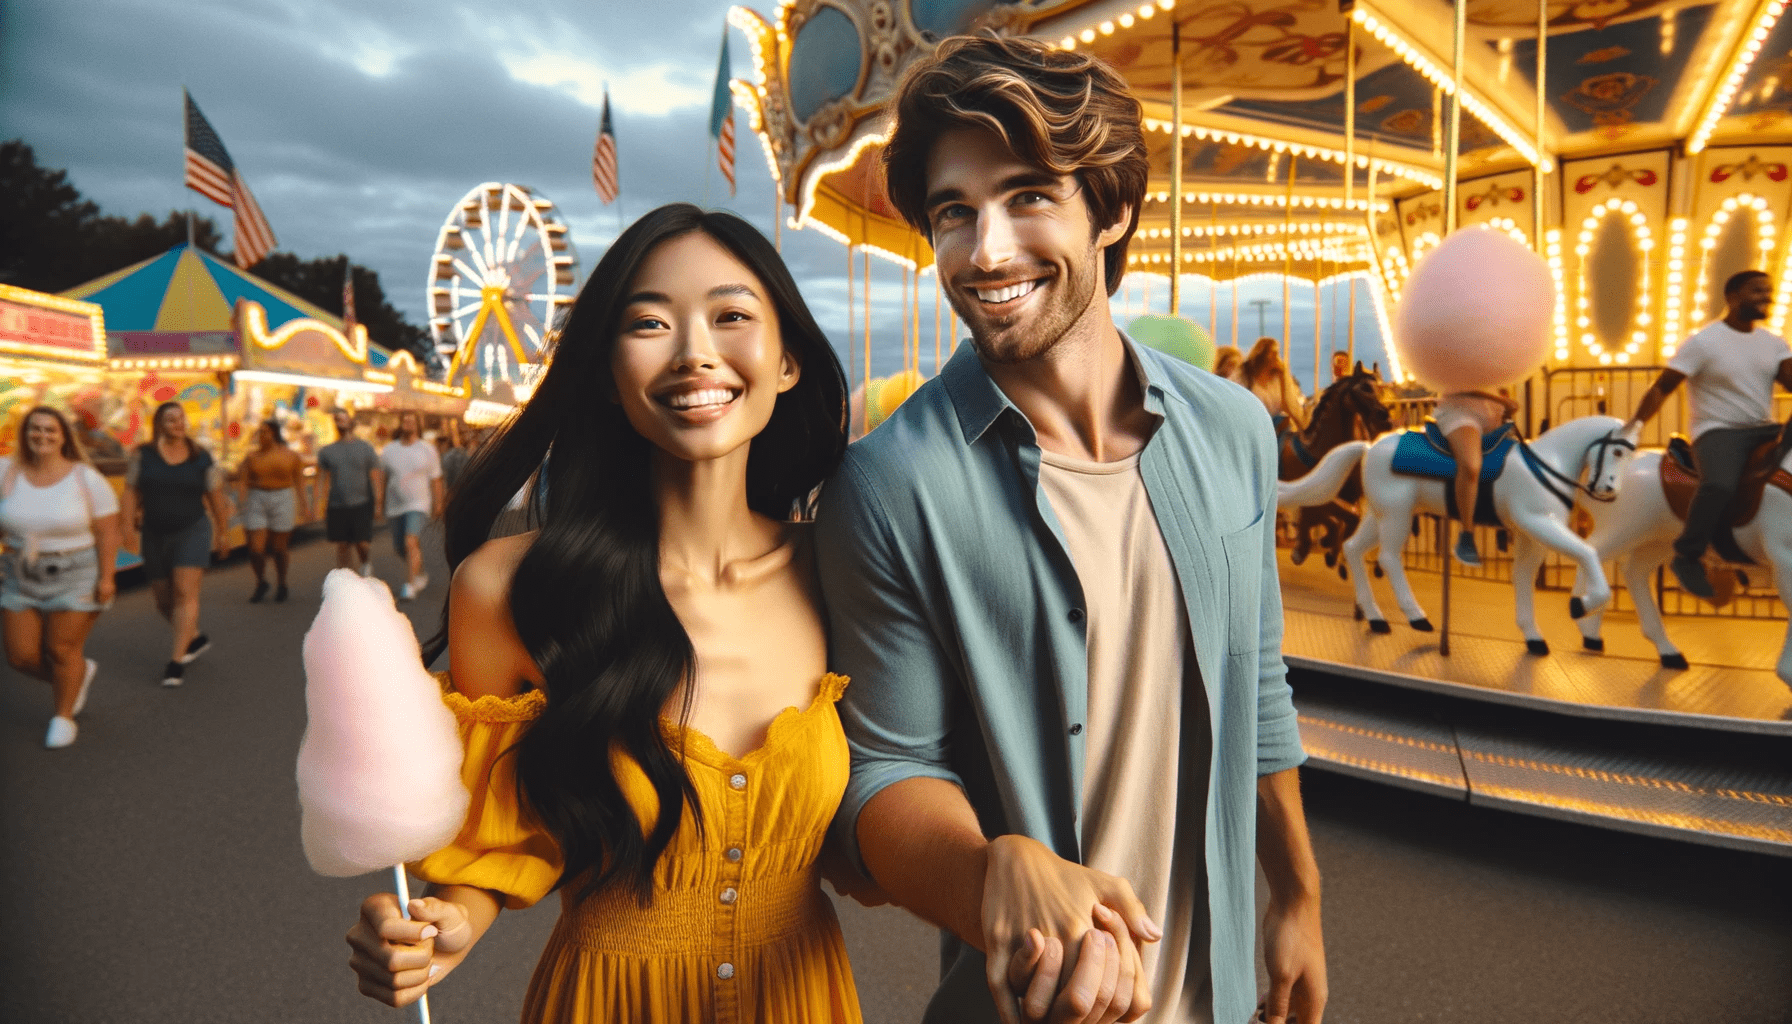 couple enjoying a fun fair. The woman a South Asian with long black hair is wearing a bright yellow dress and the man